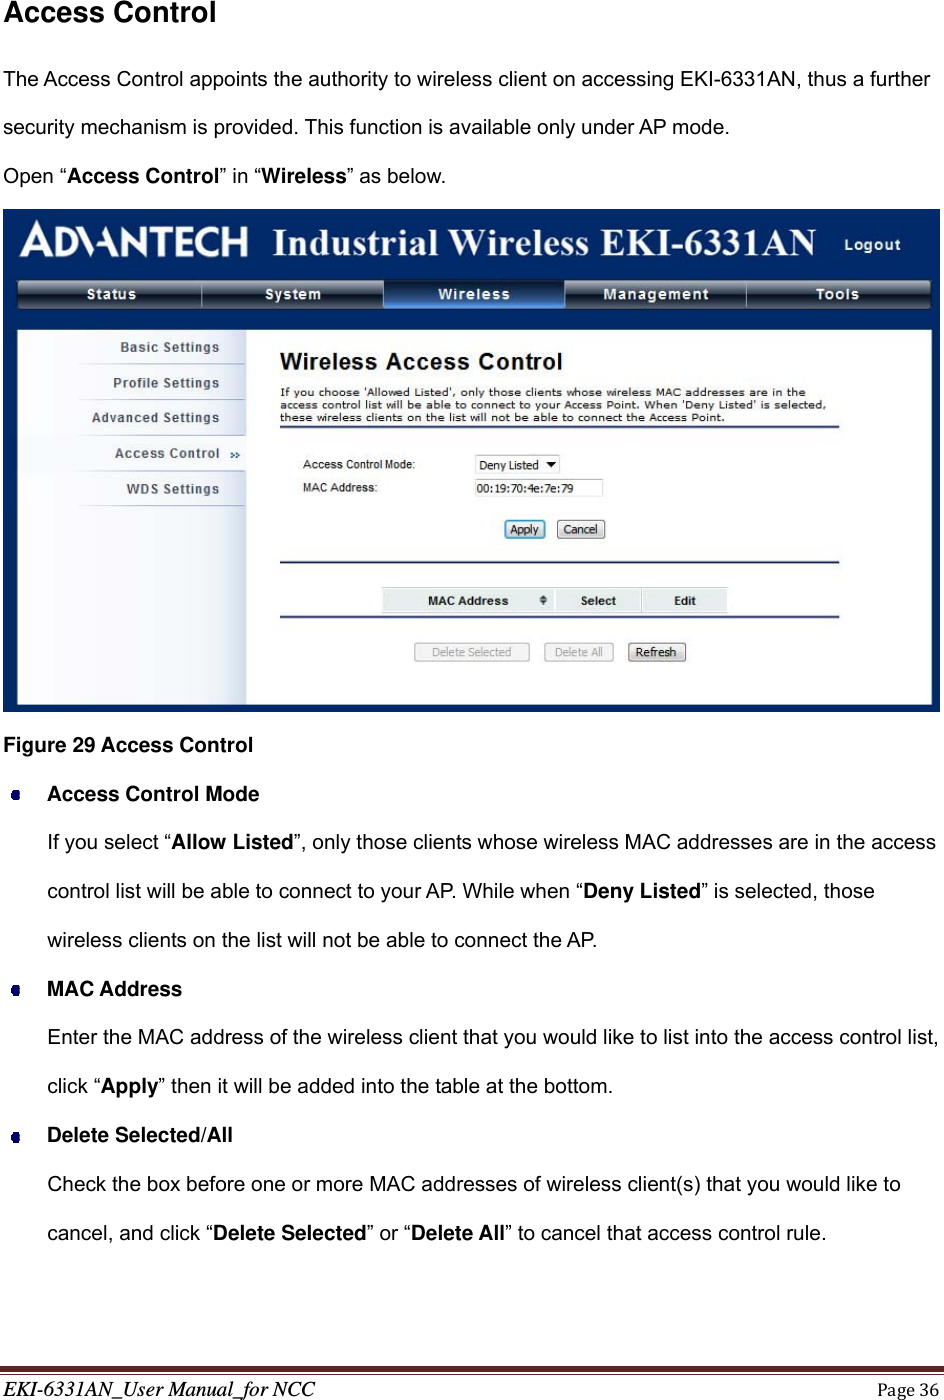 EKI-6331AN_User Manual_for NCCPage36  Access Control The Access Control appoints the authority to wireless client on accessing EKI-6331AN, thus a further security mechanism is provided. This function is available only under AP mode. Open “Access Control” in “Wireless” as below.  Figure 29 Access Control  Access Control Mode If you select “Allow Listed”, only those clients whose wireless MAC addresses are in the access control list will be able to connect to your AP. While when “Deny Listed” is selected, those wireless clients on the list will not be able to connect the AP.  MAC Address Enter the MAC address of the wireless client that you would like to list into the access control list, click “Apply” then it will be added into the table at the bottom.  Delete Selected/All Check the box before one or more MAC addresses of wireless client(s) that you would like to cancel, and click “Delete Selected” or “Delete All” to cancel that access control rule.   